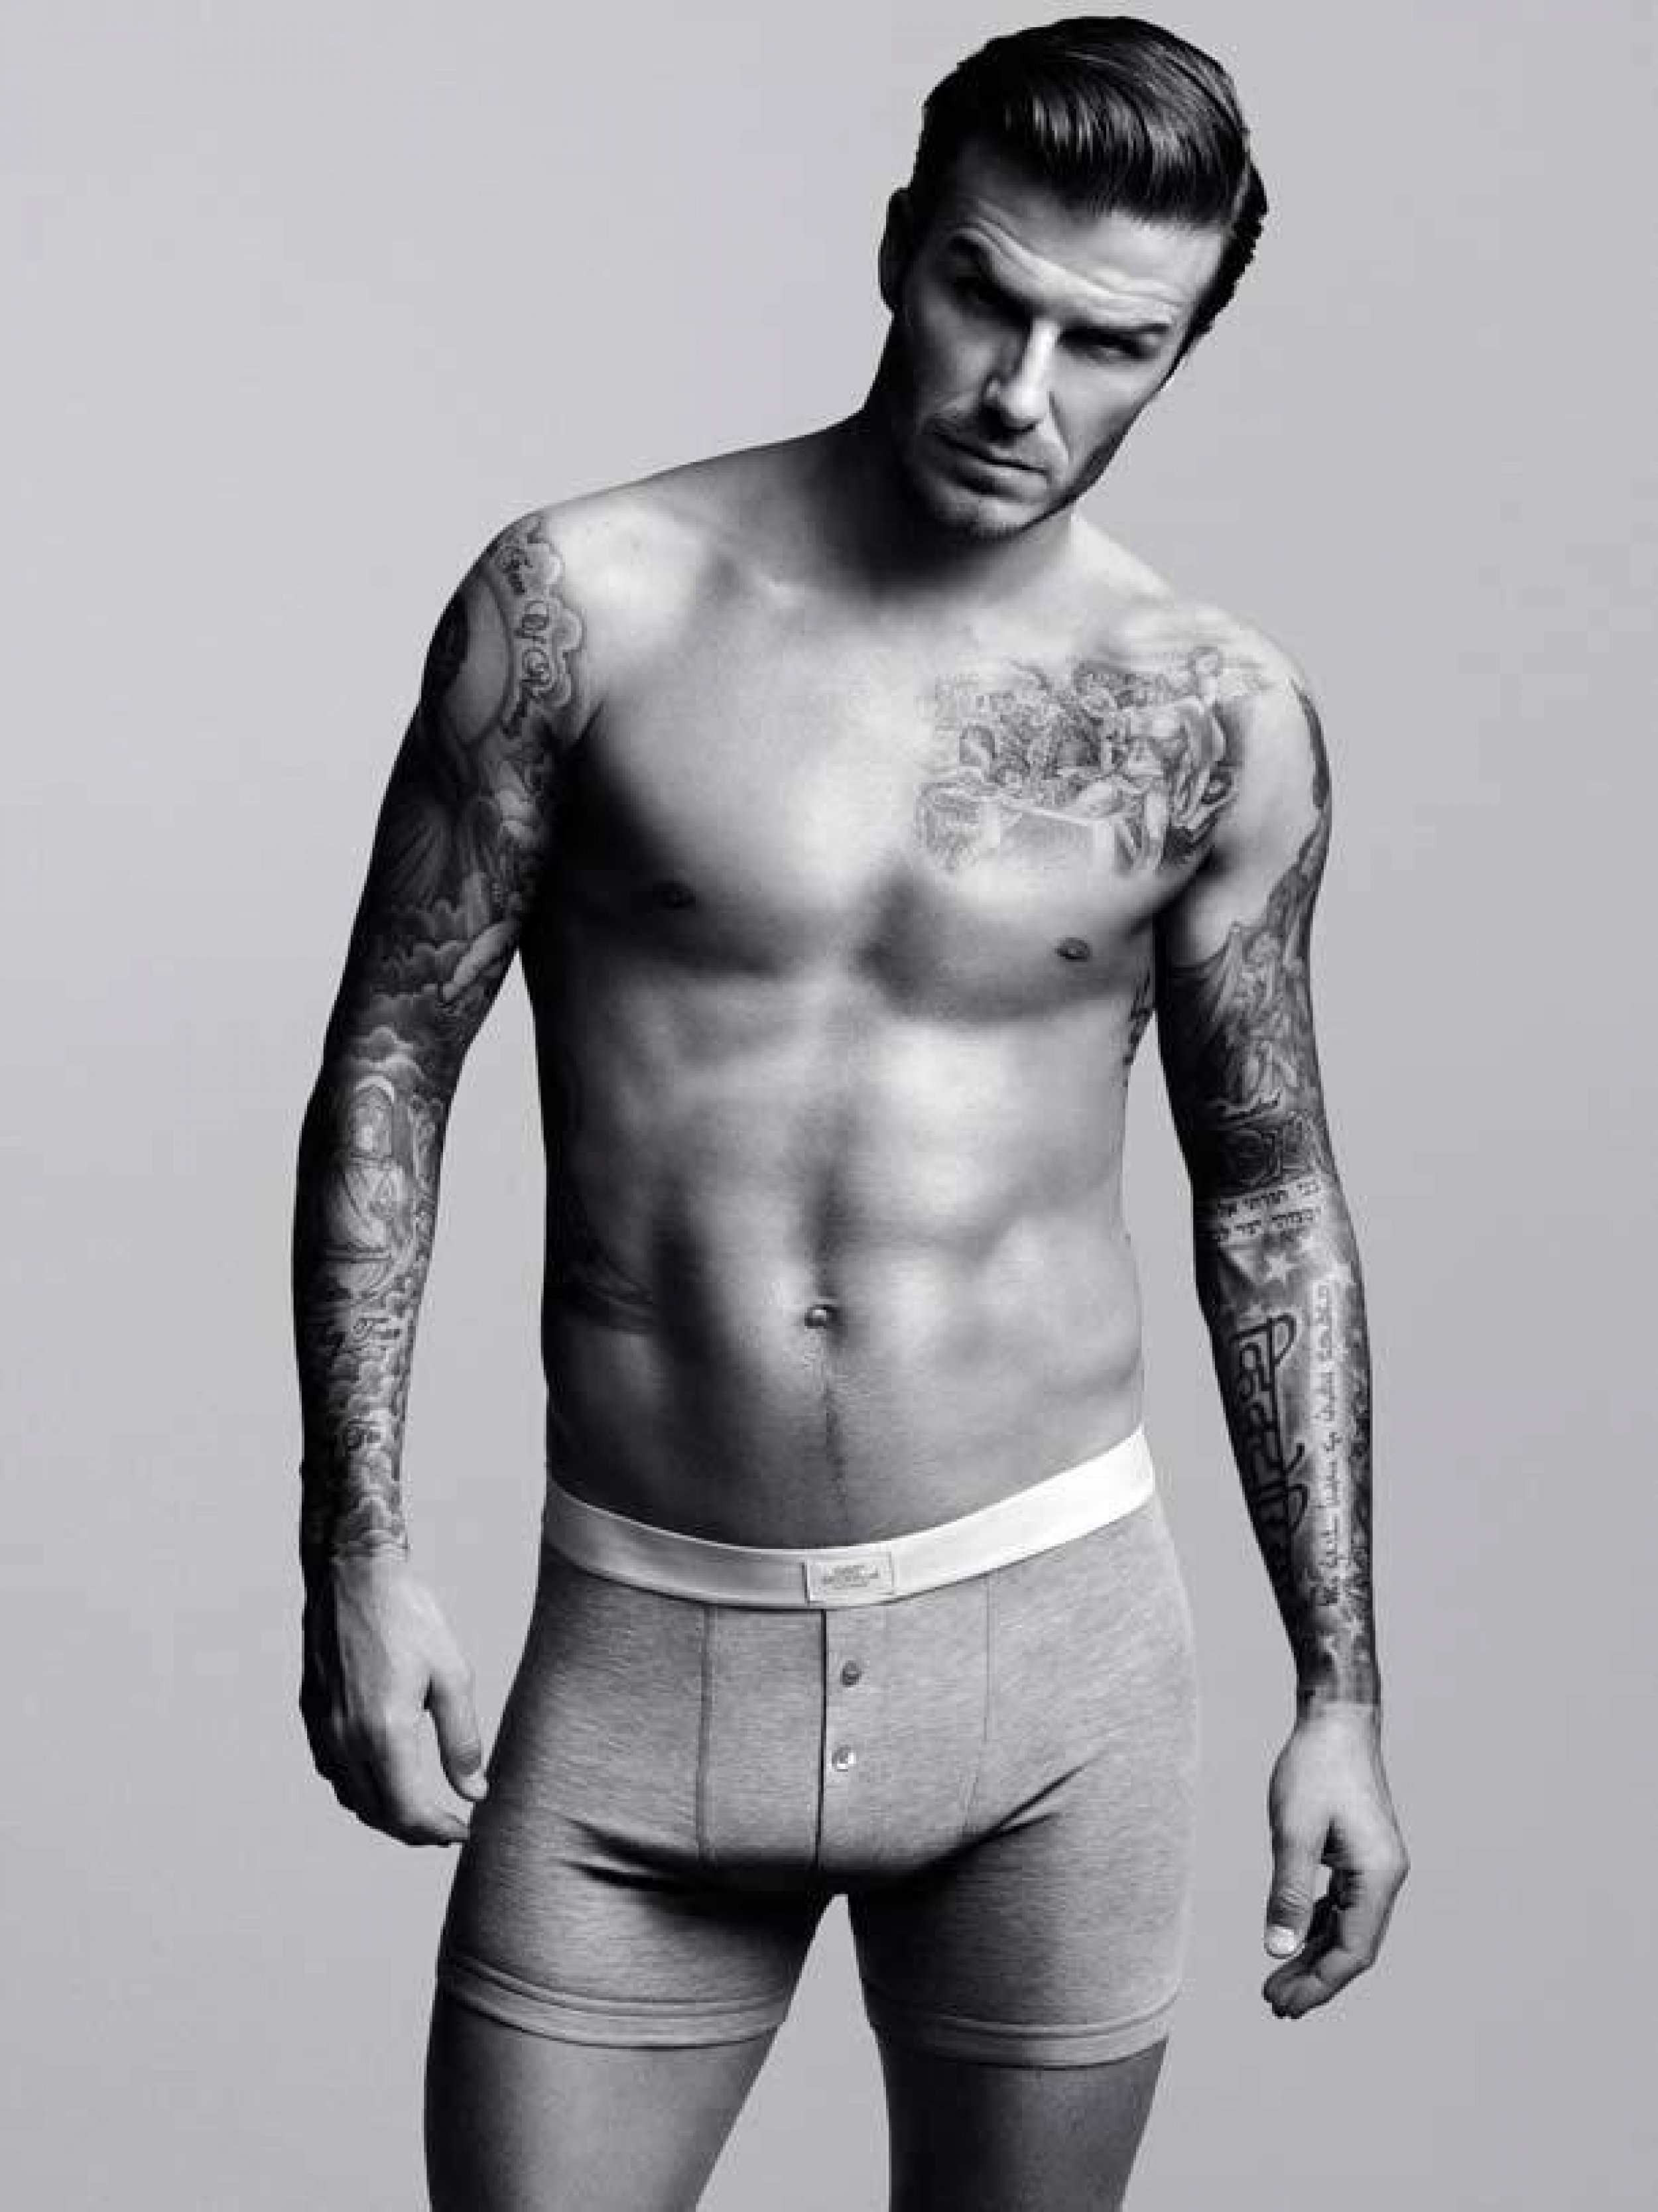 David Beckham can regularly be seen wearing next to nothing in giant billboards everywhere and now Beckham039s sleek physique will be featured somewhere else - Elle UK.